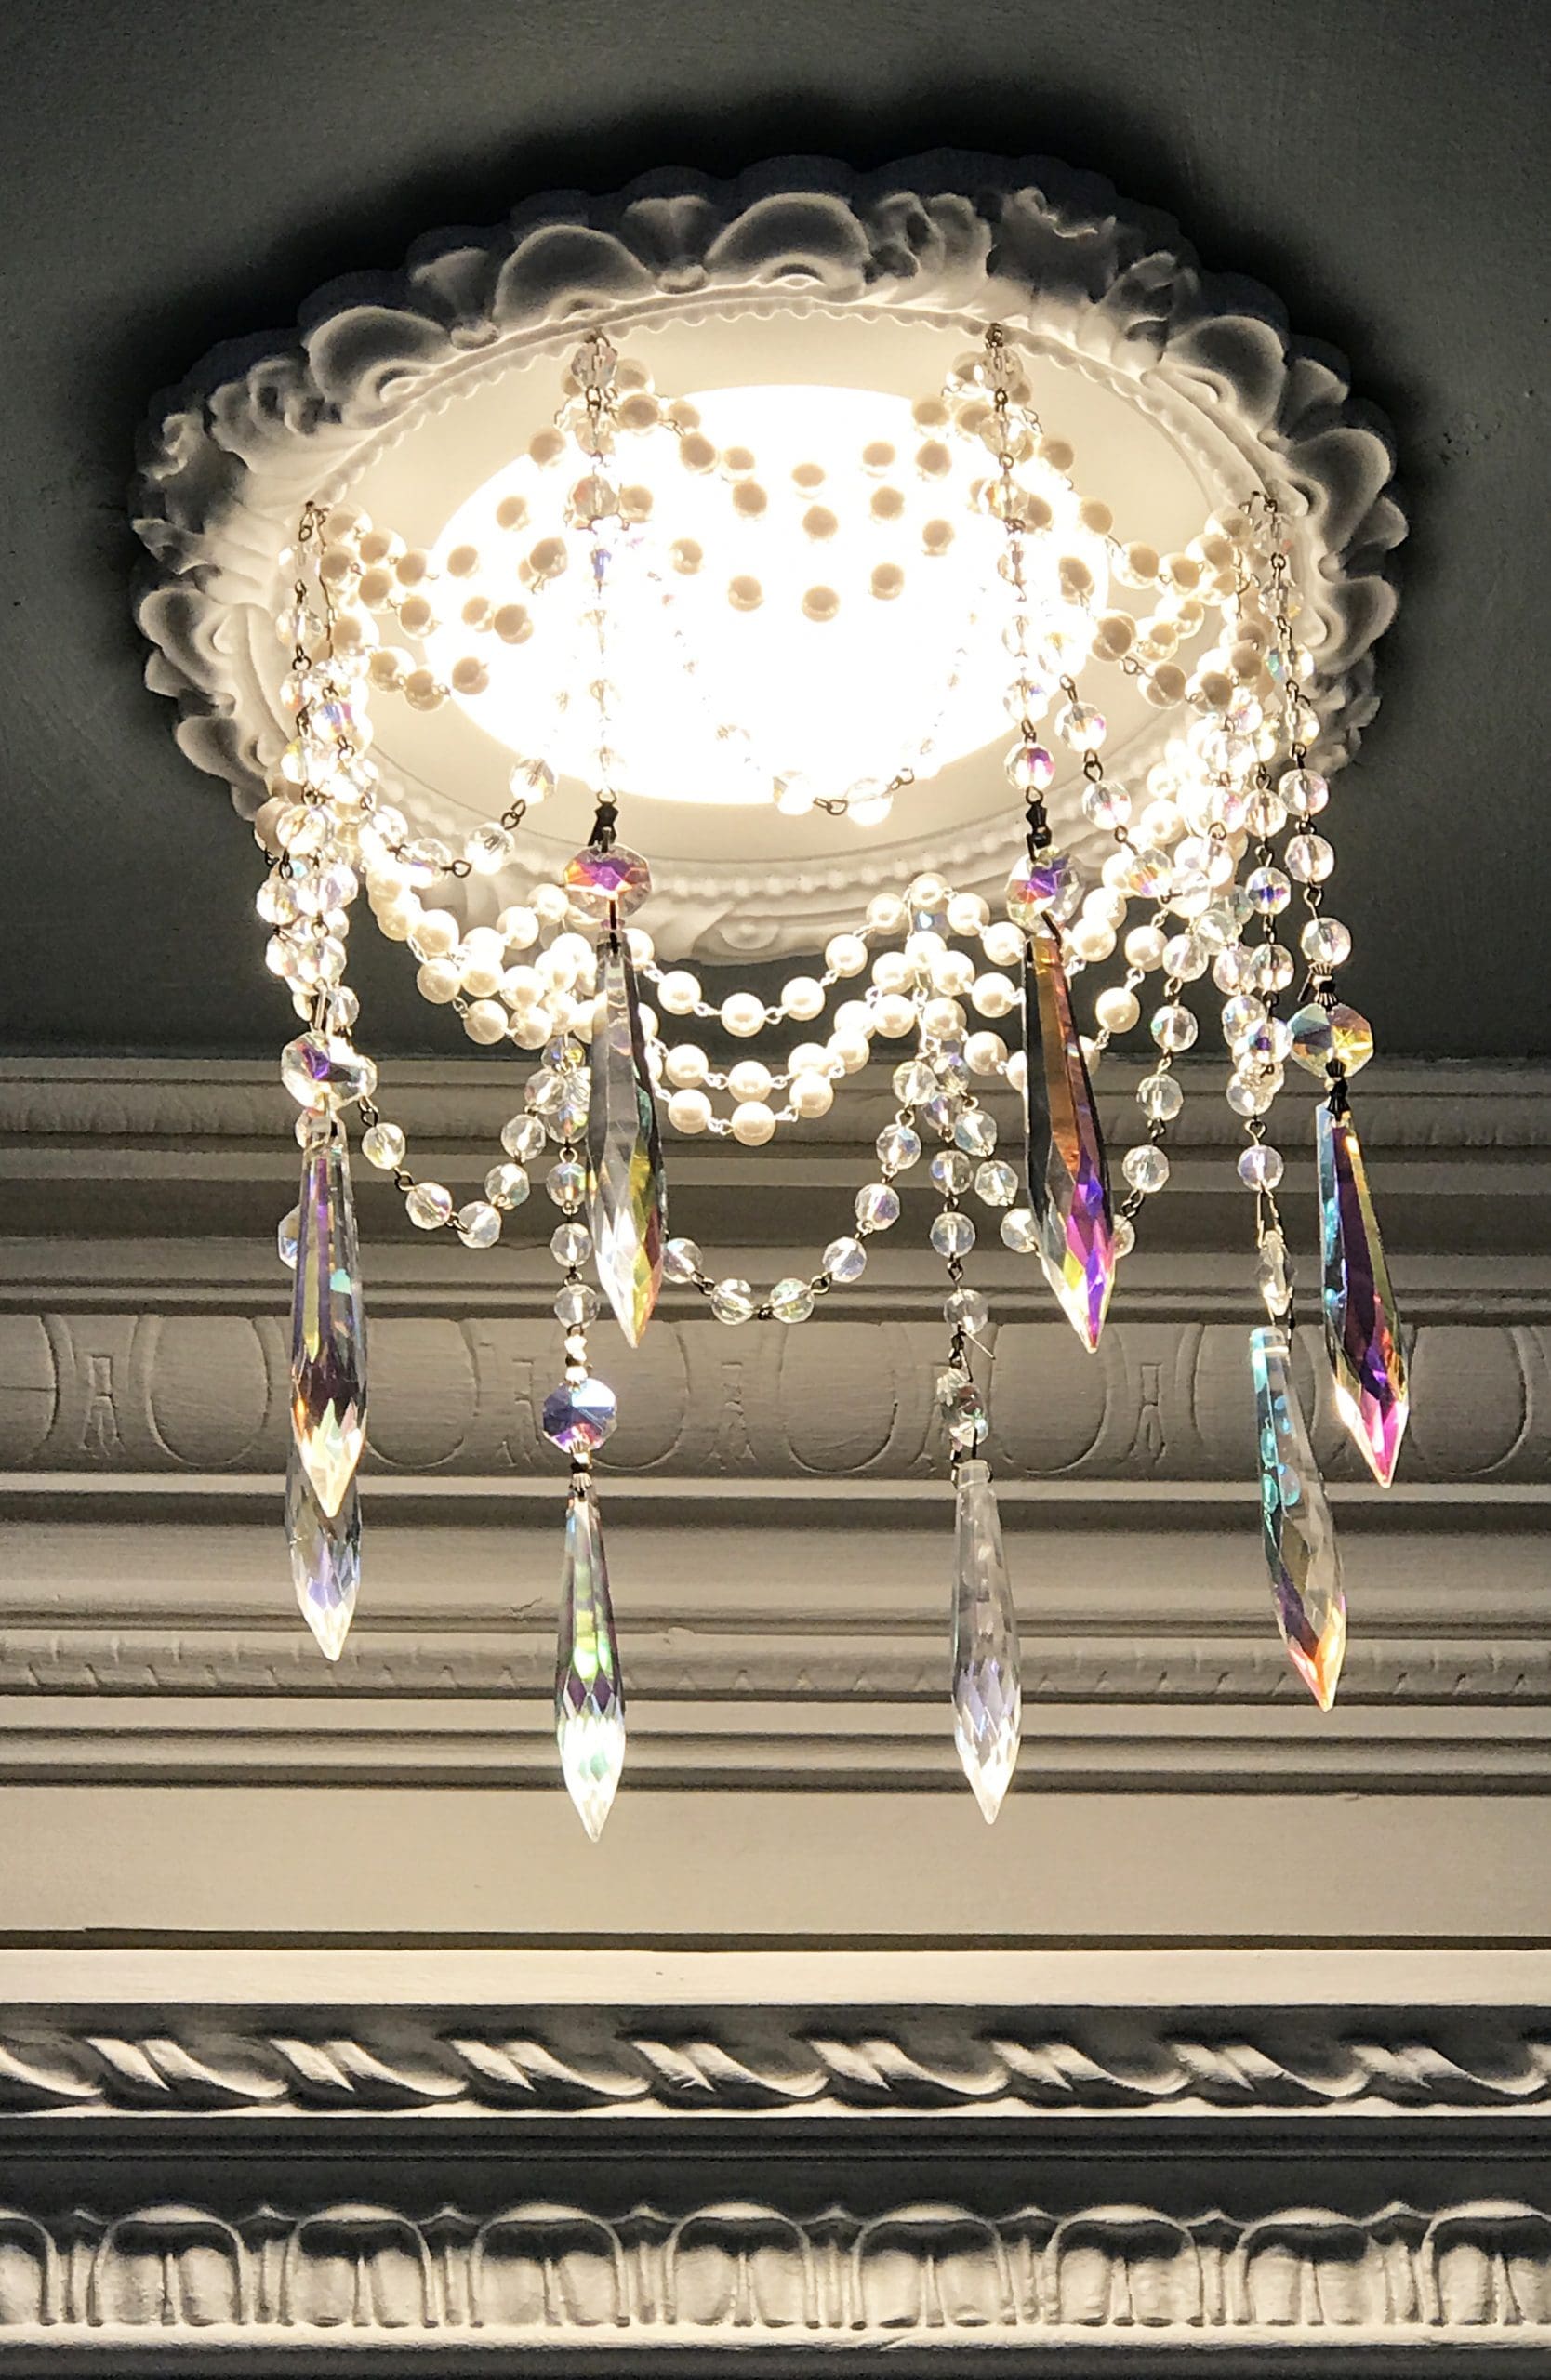 6" LED Recessed Chandelier with 4 strands of pearl and crystal chain.